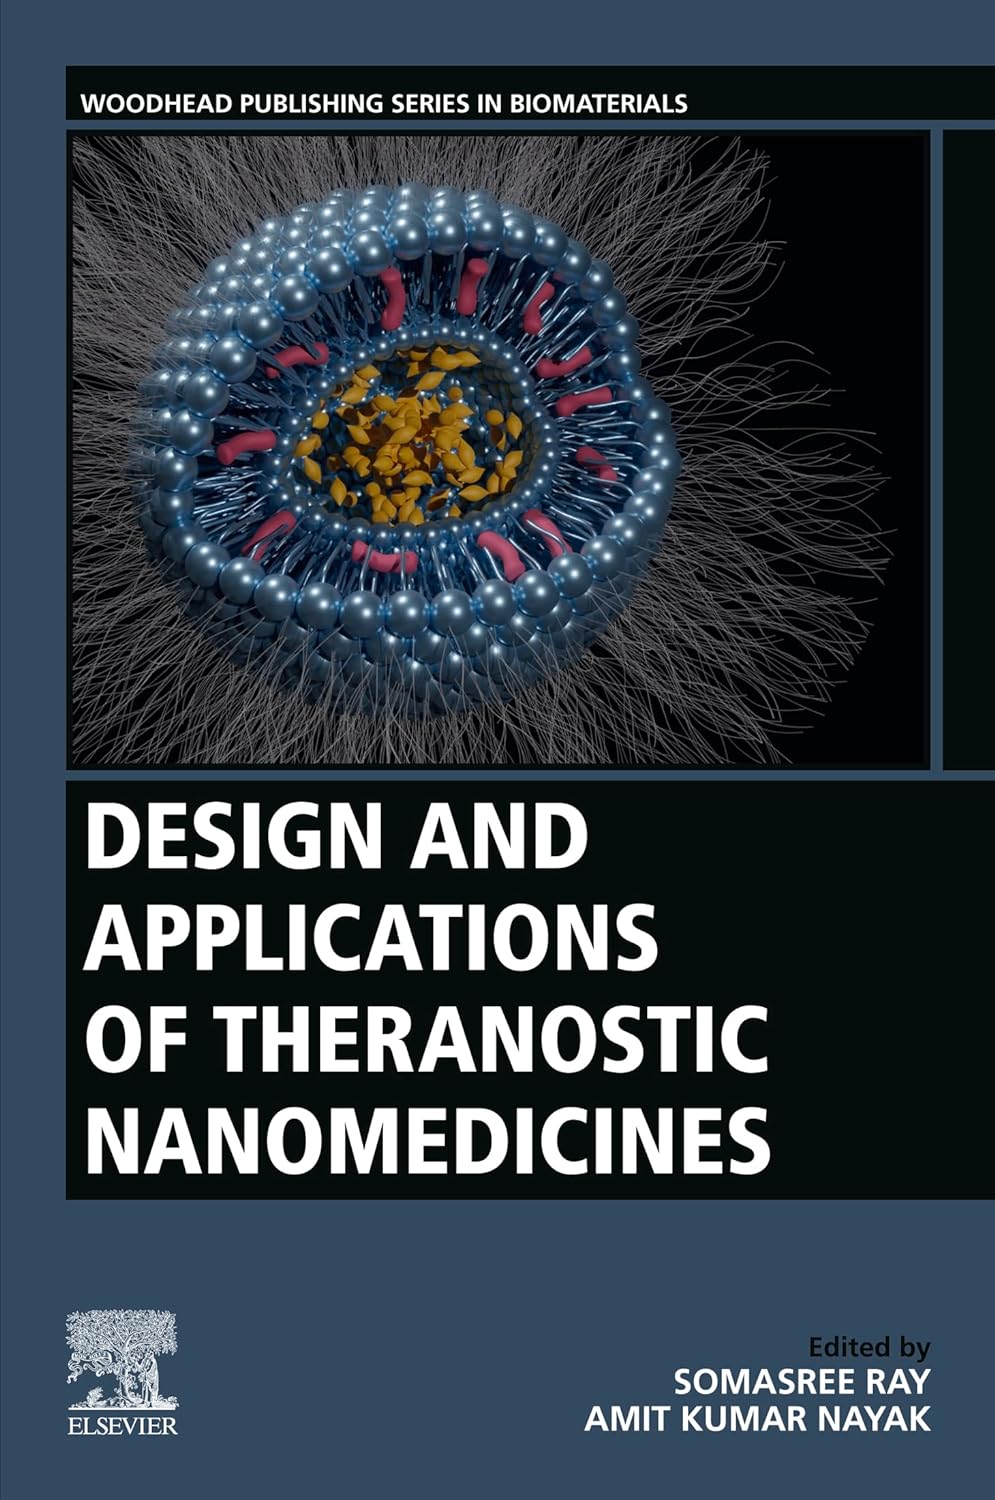 Design and Applications of Theranostic Nanomedicines (Woodhead Publishing Series in Biomaterials) by Somasree Ray 